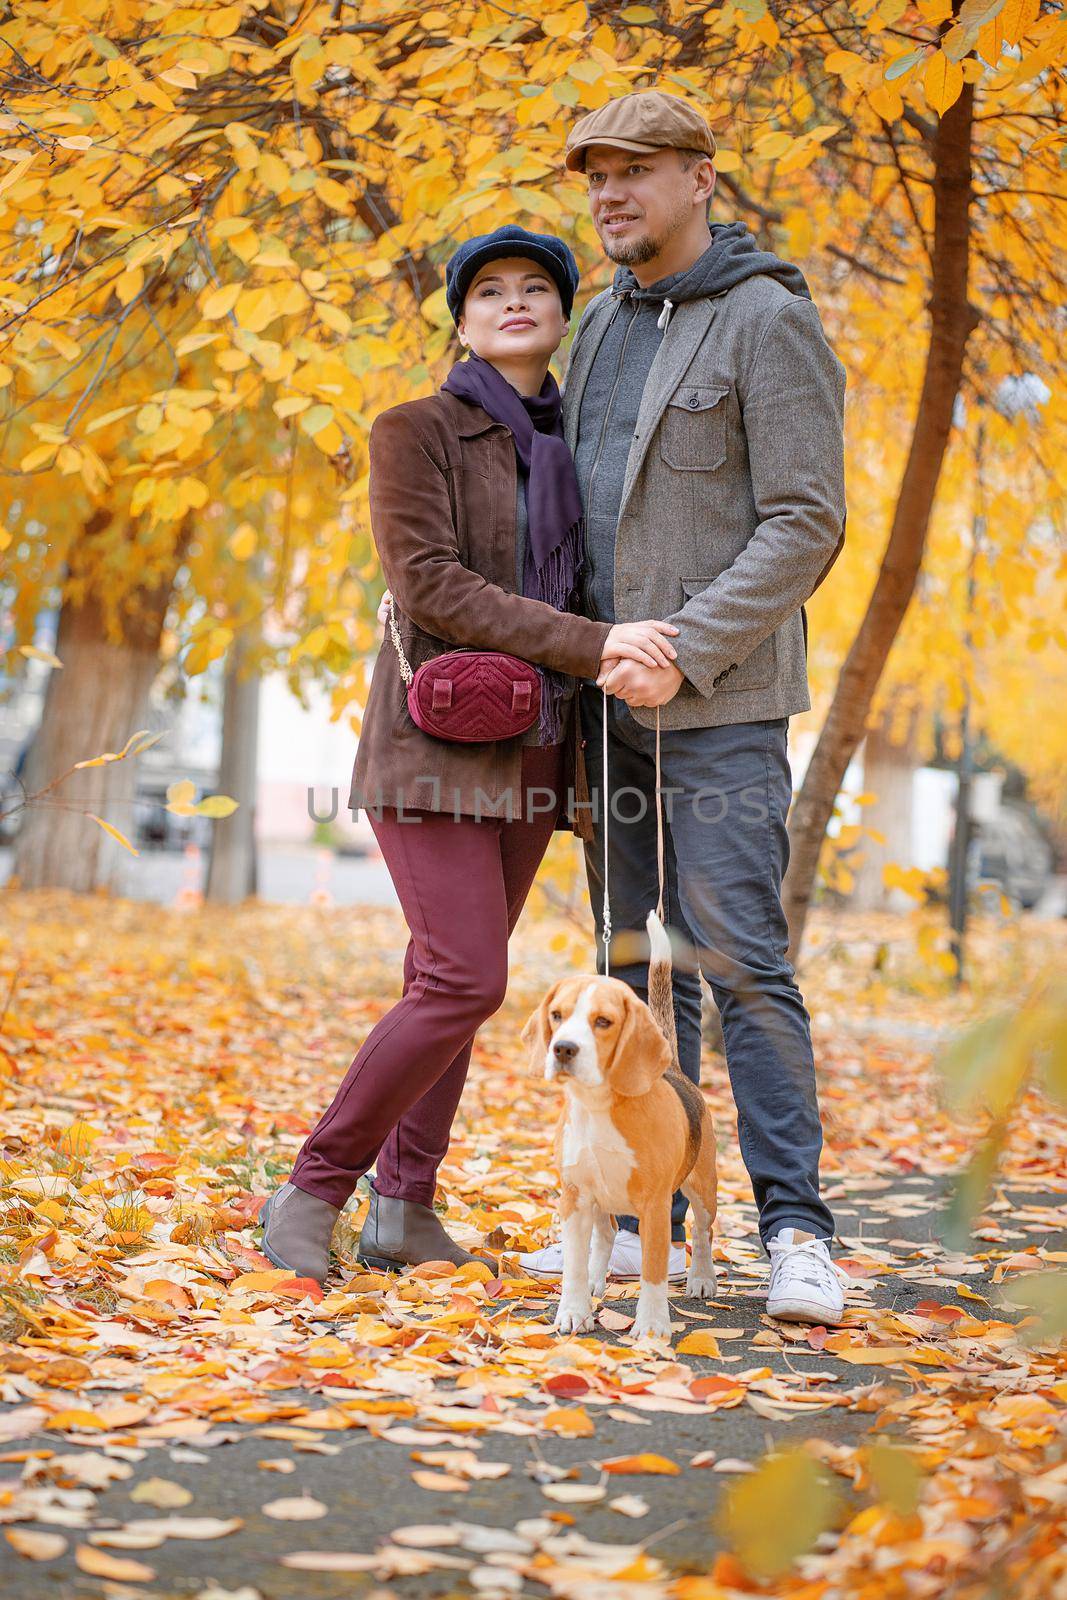 Stylish Pair About 40 Years Old on a Walk in the Fall Park With Their Dog Bigley. They Are Walking the Pooch in the Autumn Morning. Autumn park background. Full-length by LipikStockMedia